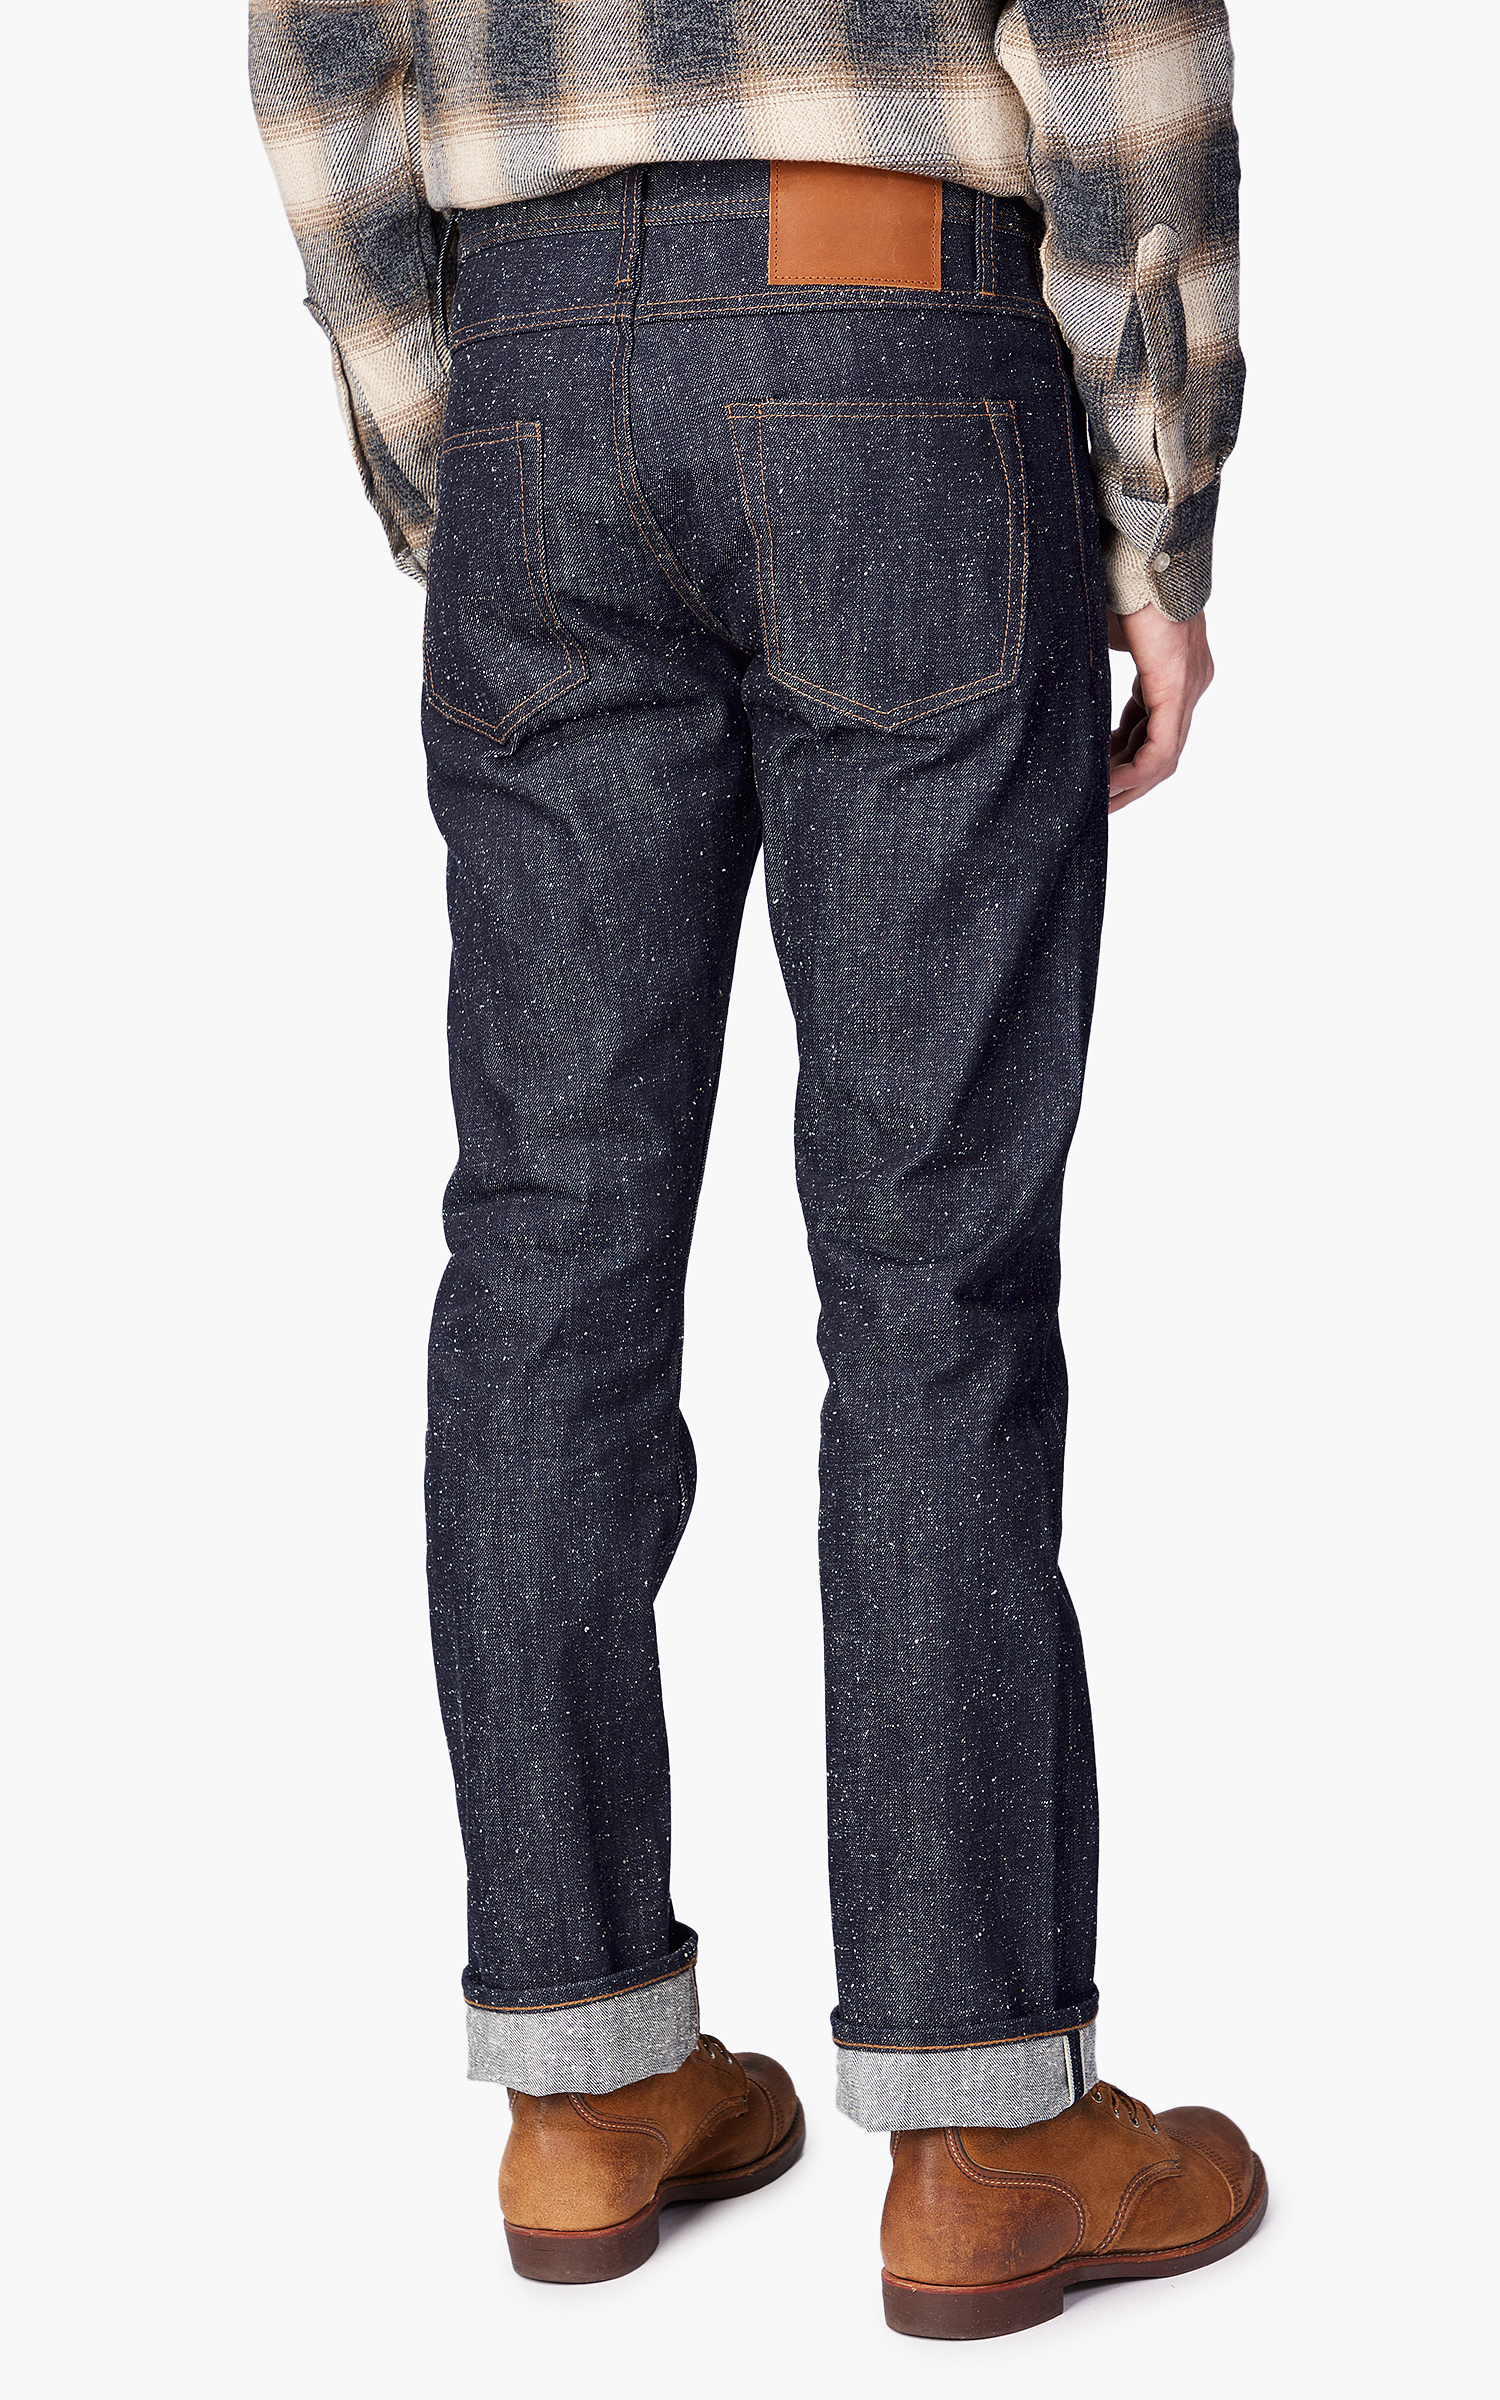 The Unbranded Brand UB243 Tapered Fit Heavyweight Neppy Selvedge 18oz